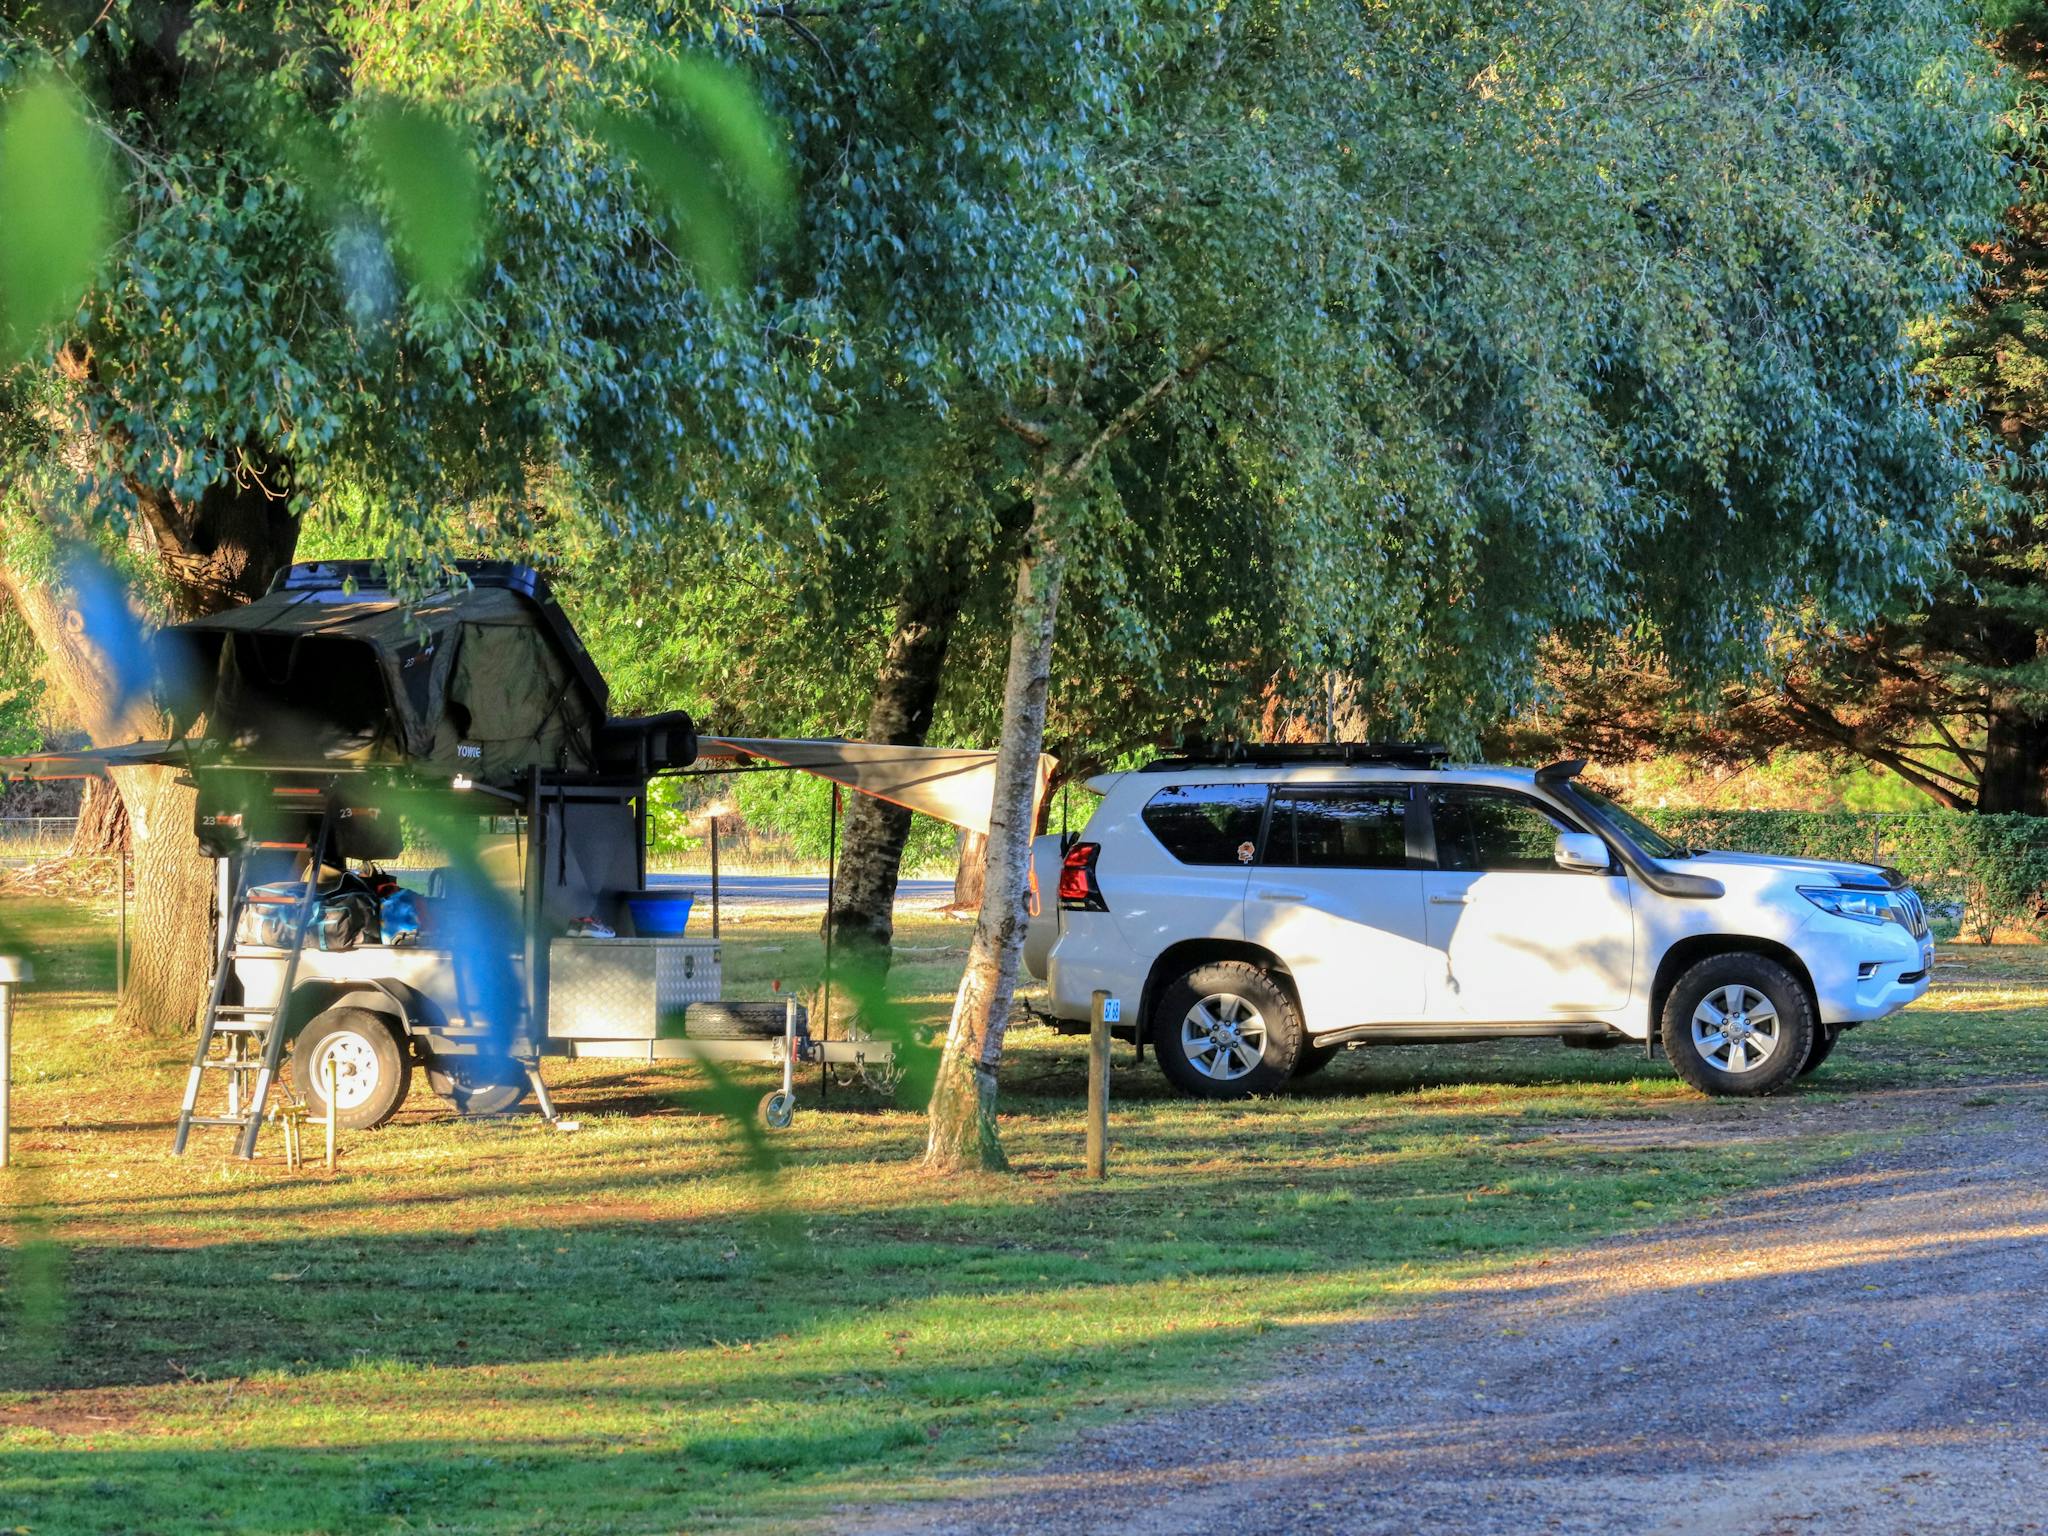 powered sites cater for caravans, camping trailers, motorhomes and tents